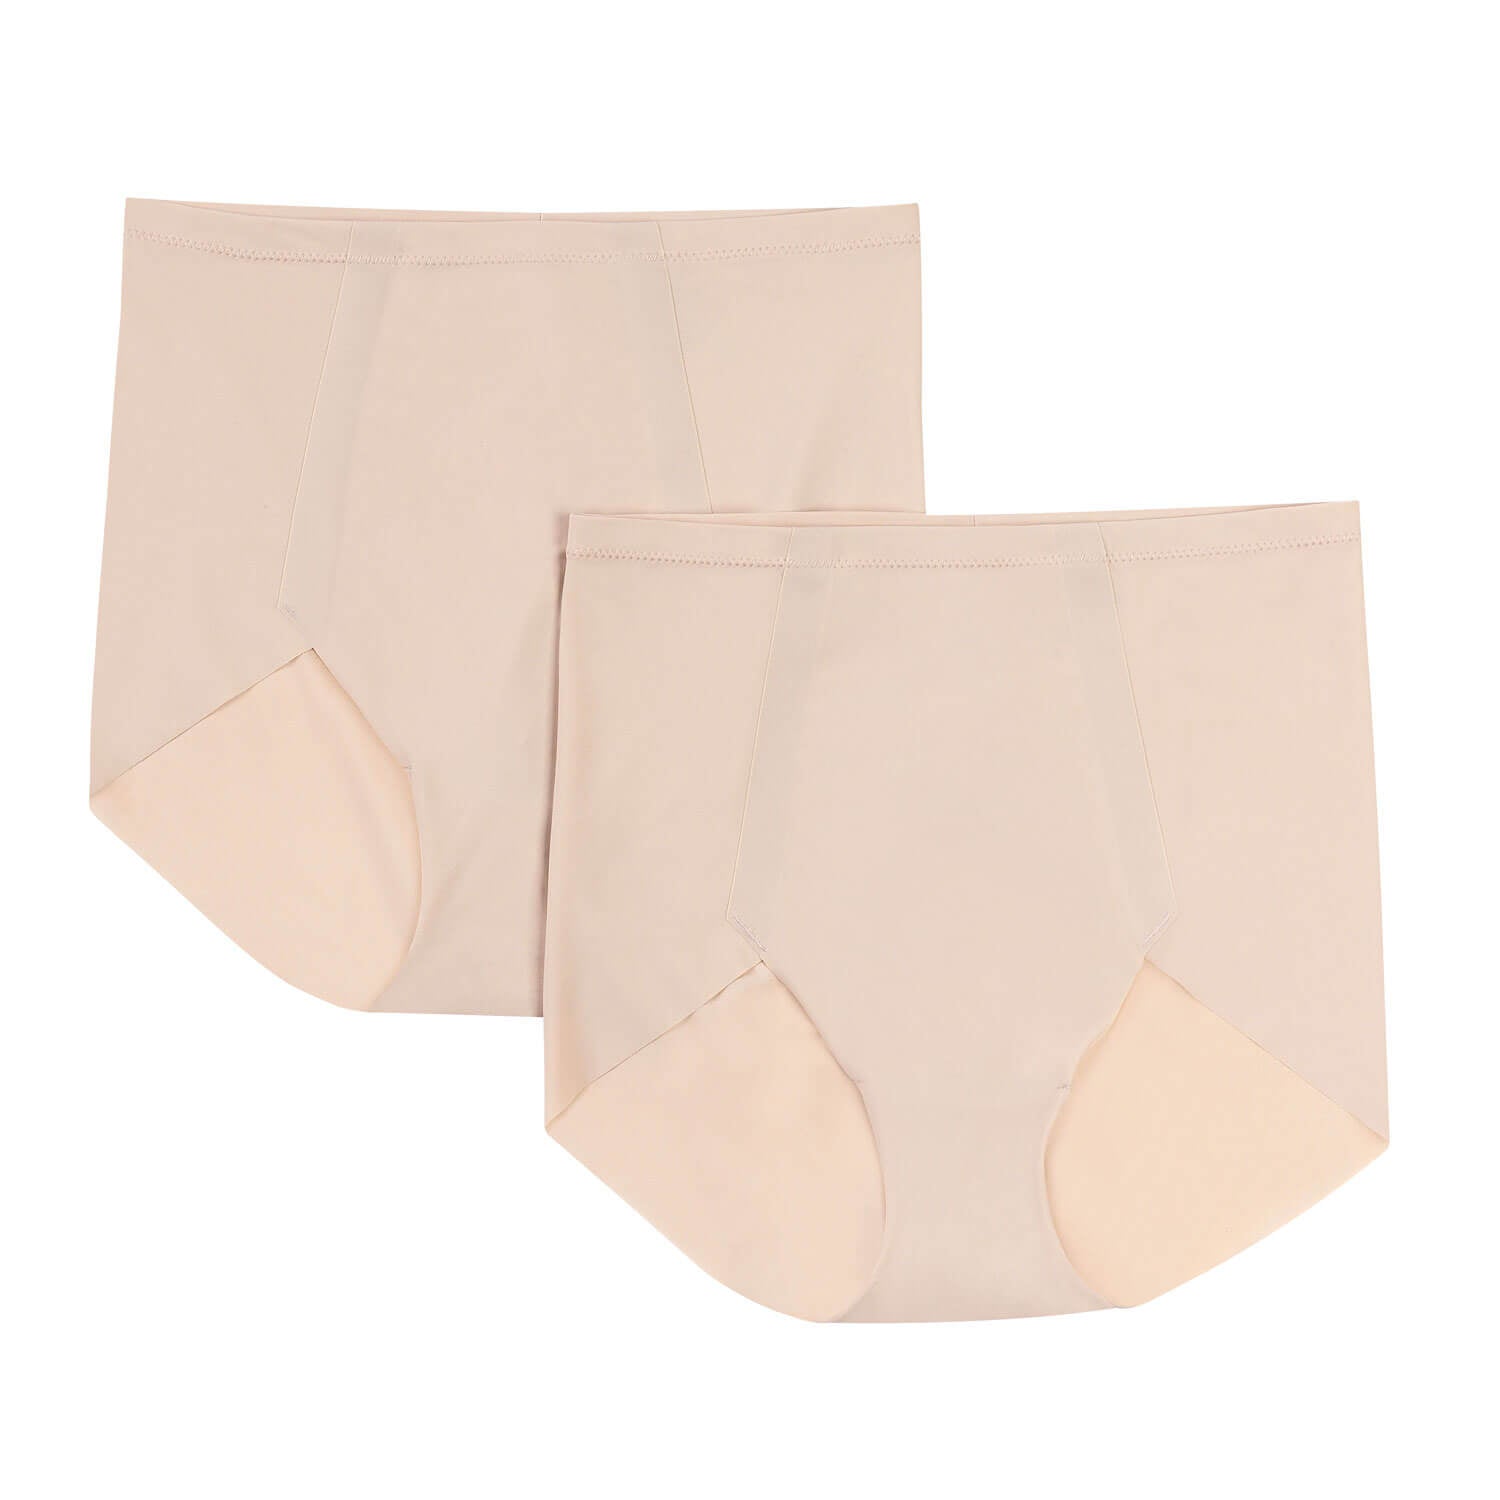 Maidenform Sleek Smoothers 2 Pack Brief - Nude 4 Shaws Department Stores